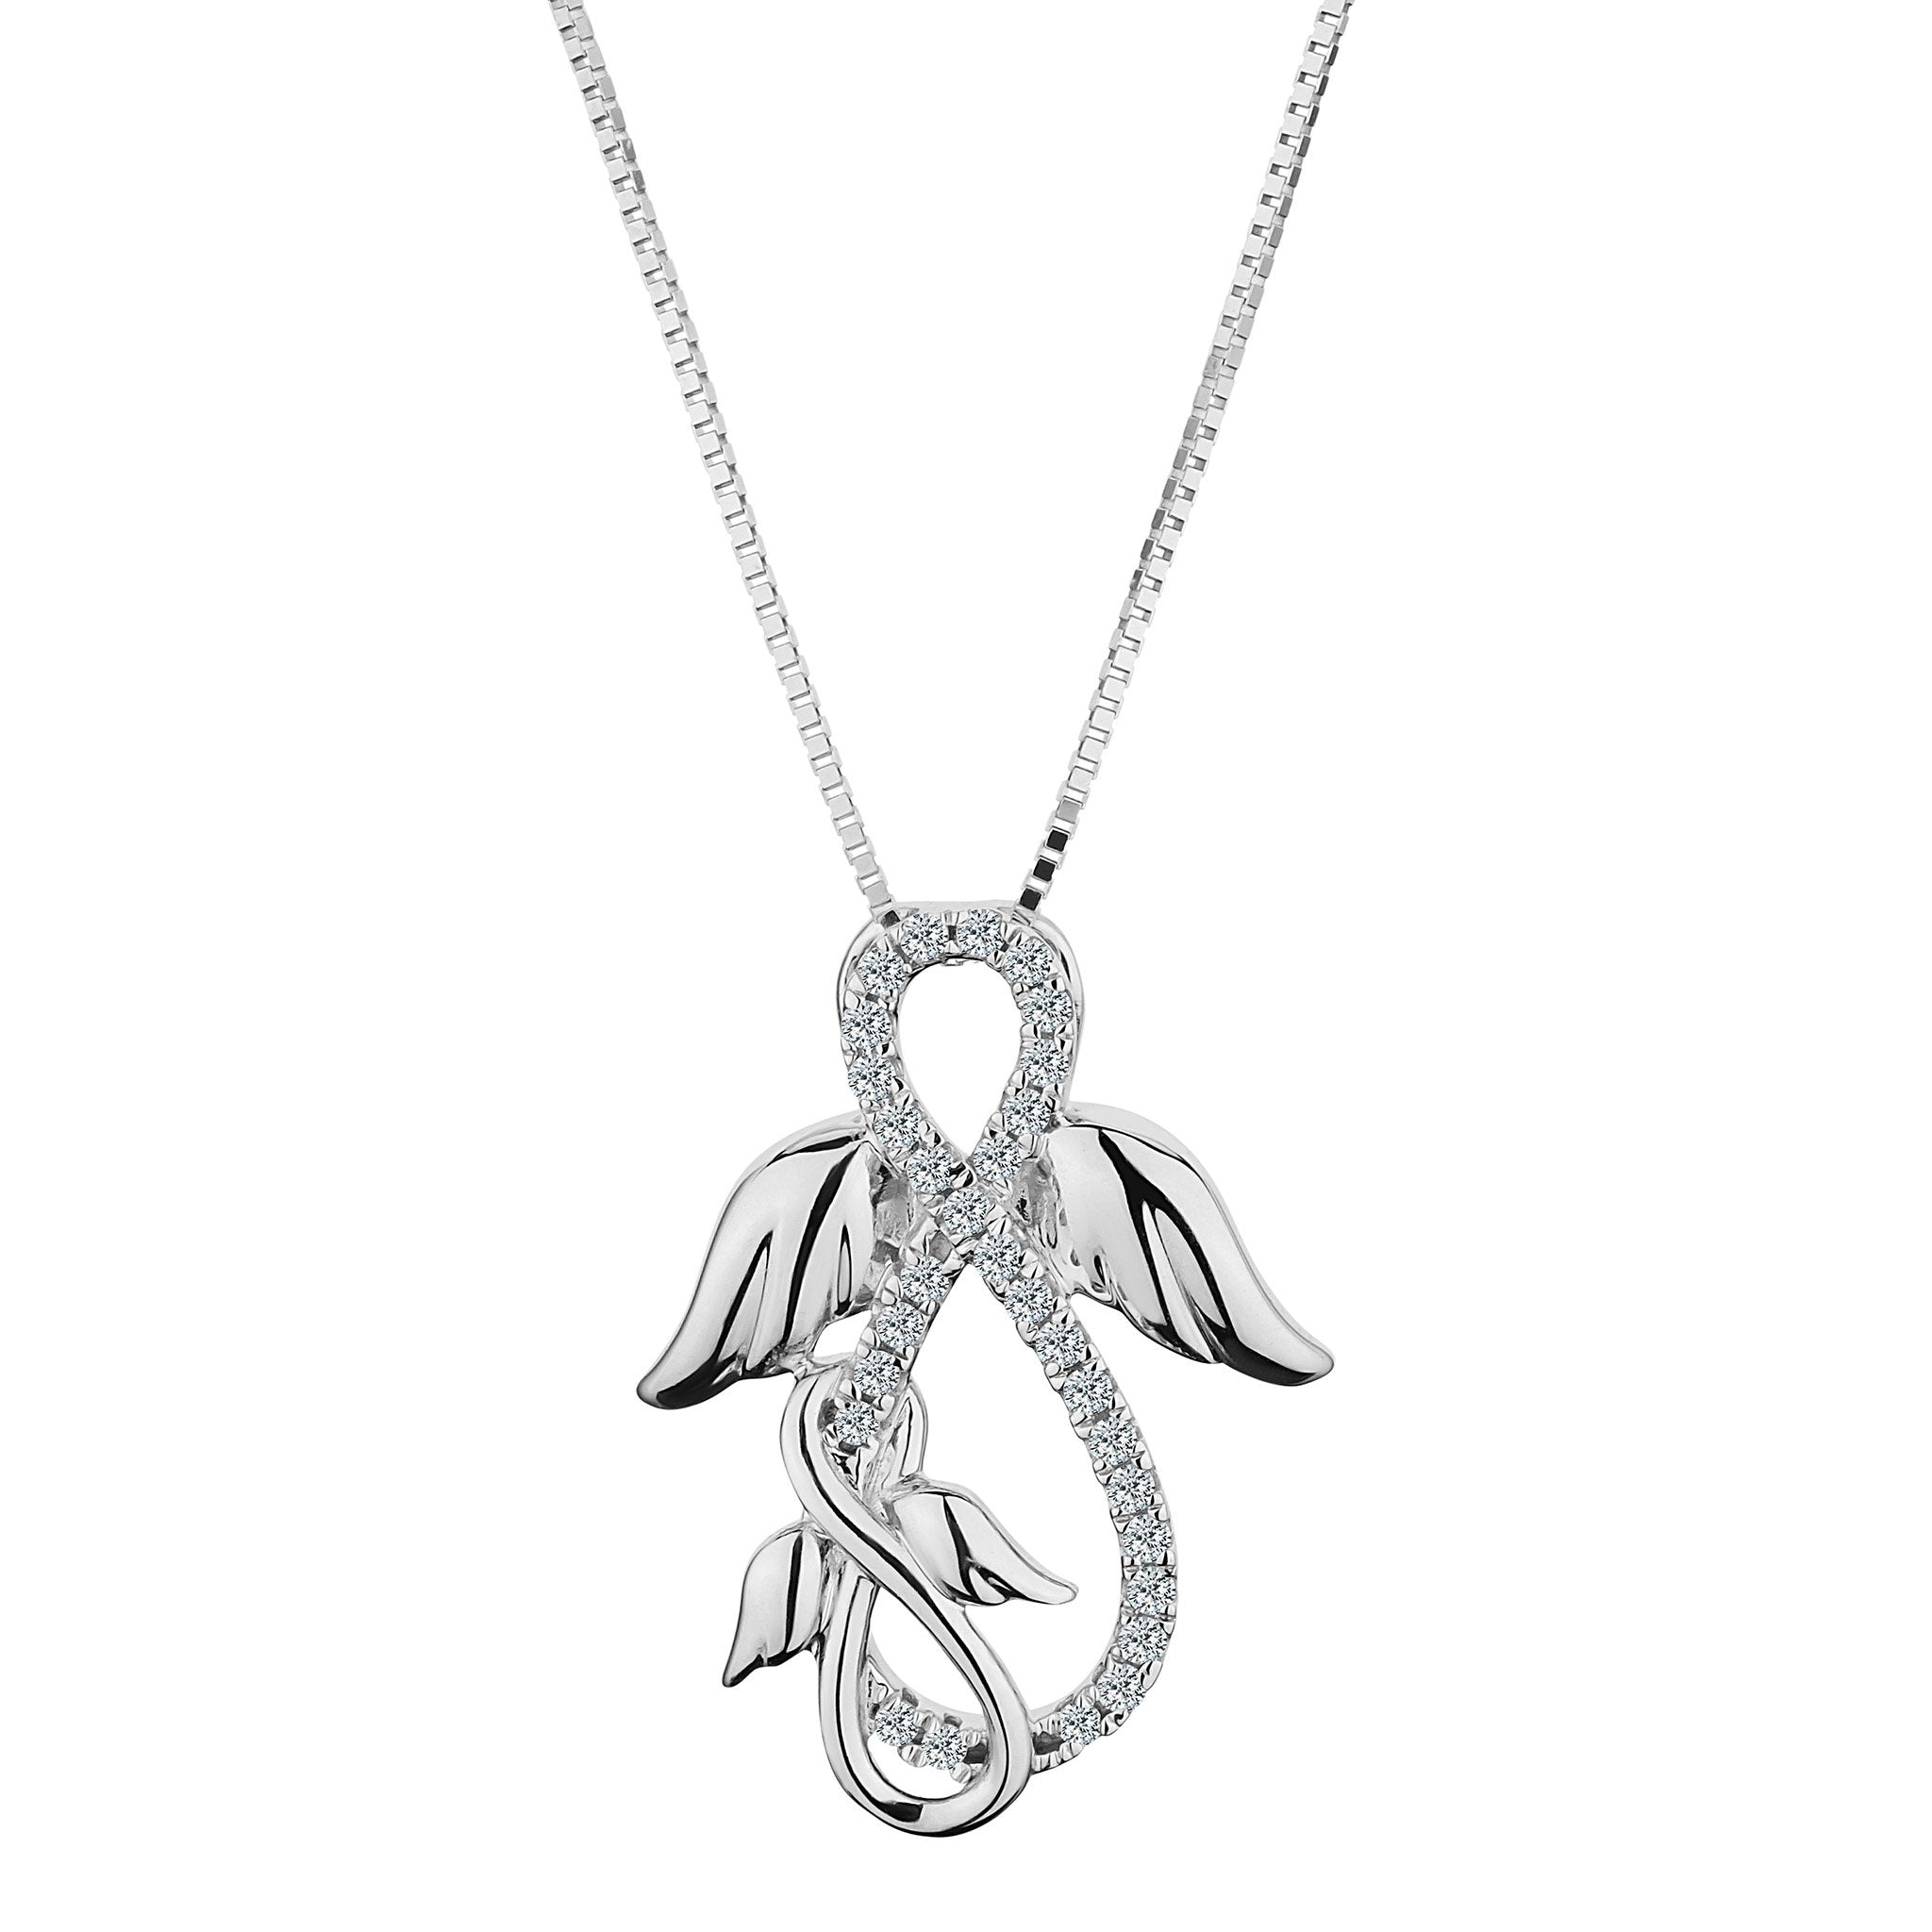 .12 Carat "Two Angels Mother & Child" Diamond Pendant,  10kt White Gold. Necklaces and Pendants. Griffin Jewellery Designs.